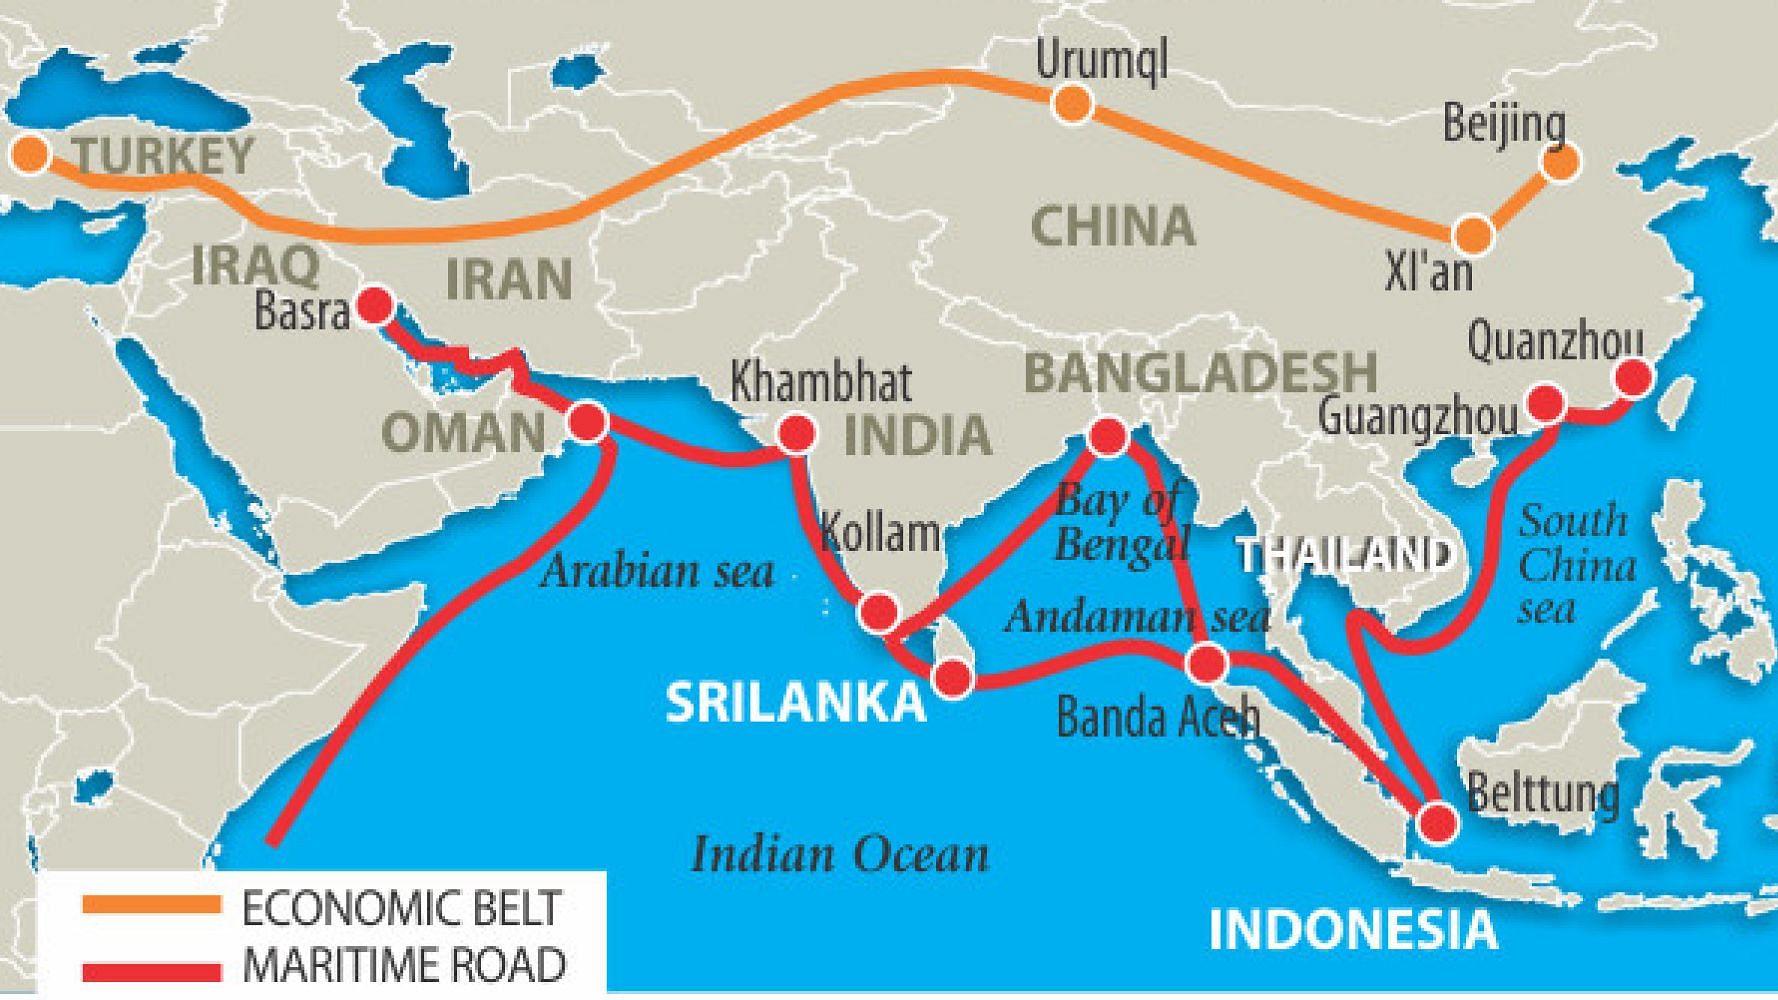 The map also surprisingly portrays India as part of BRI, even though it has boycotted the summit for a second time.